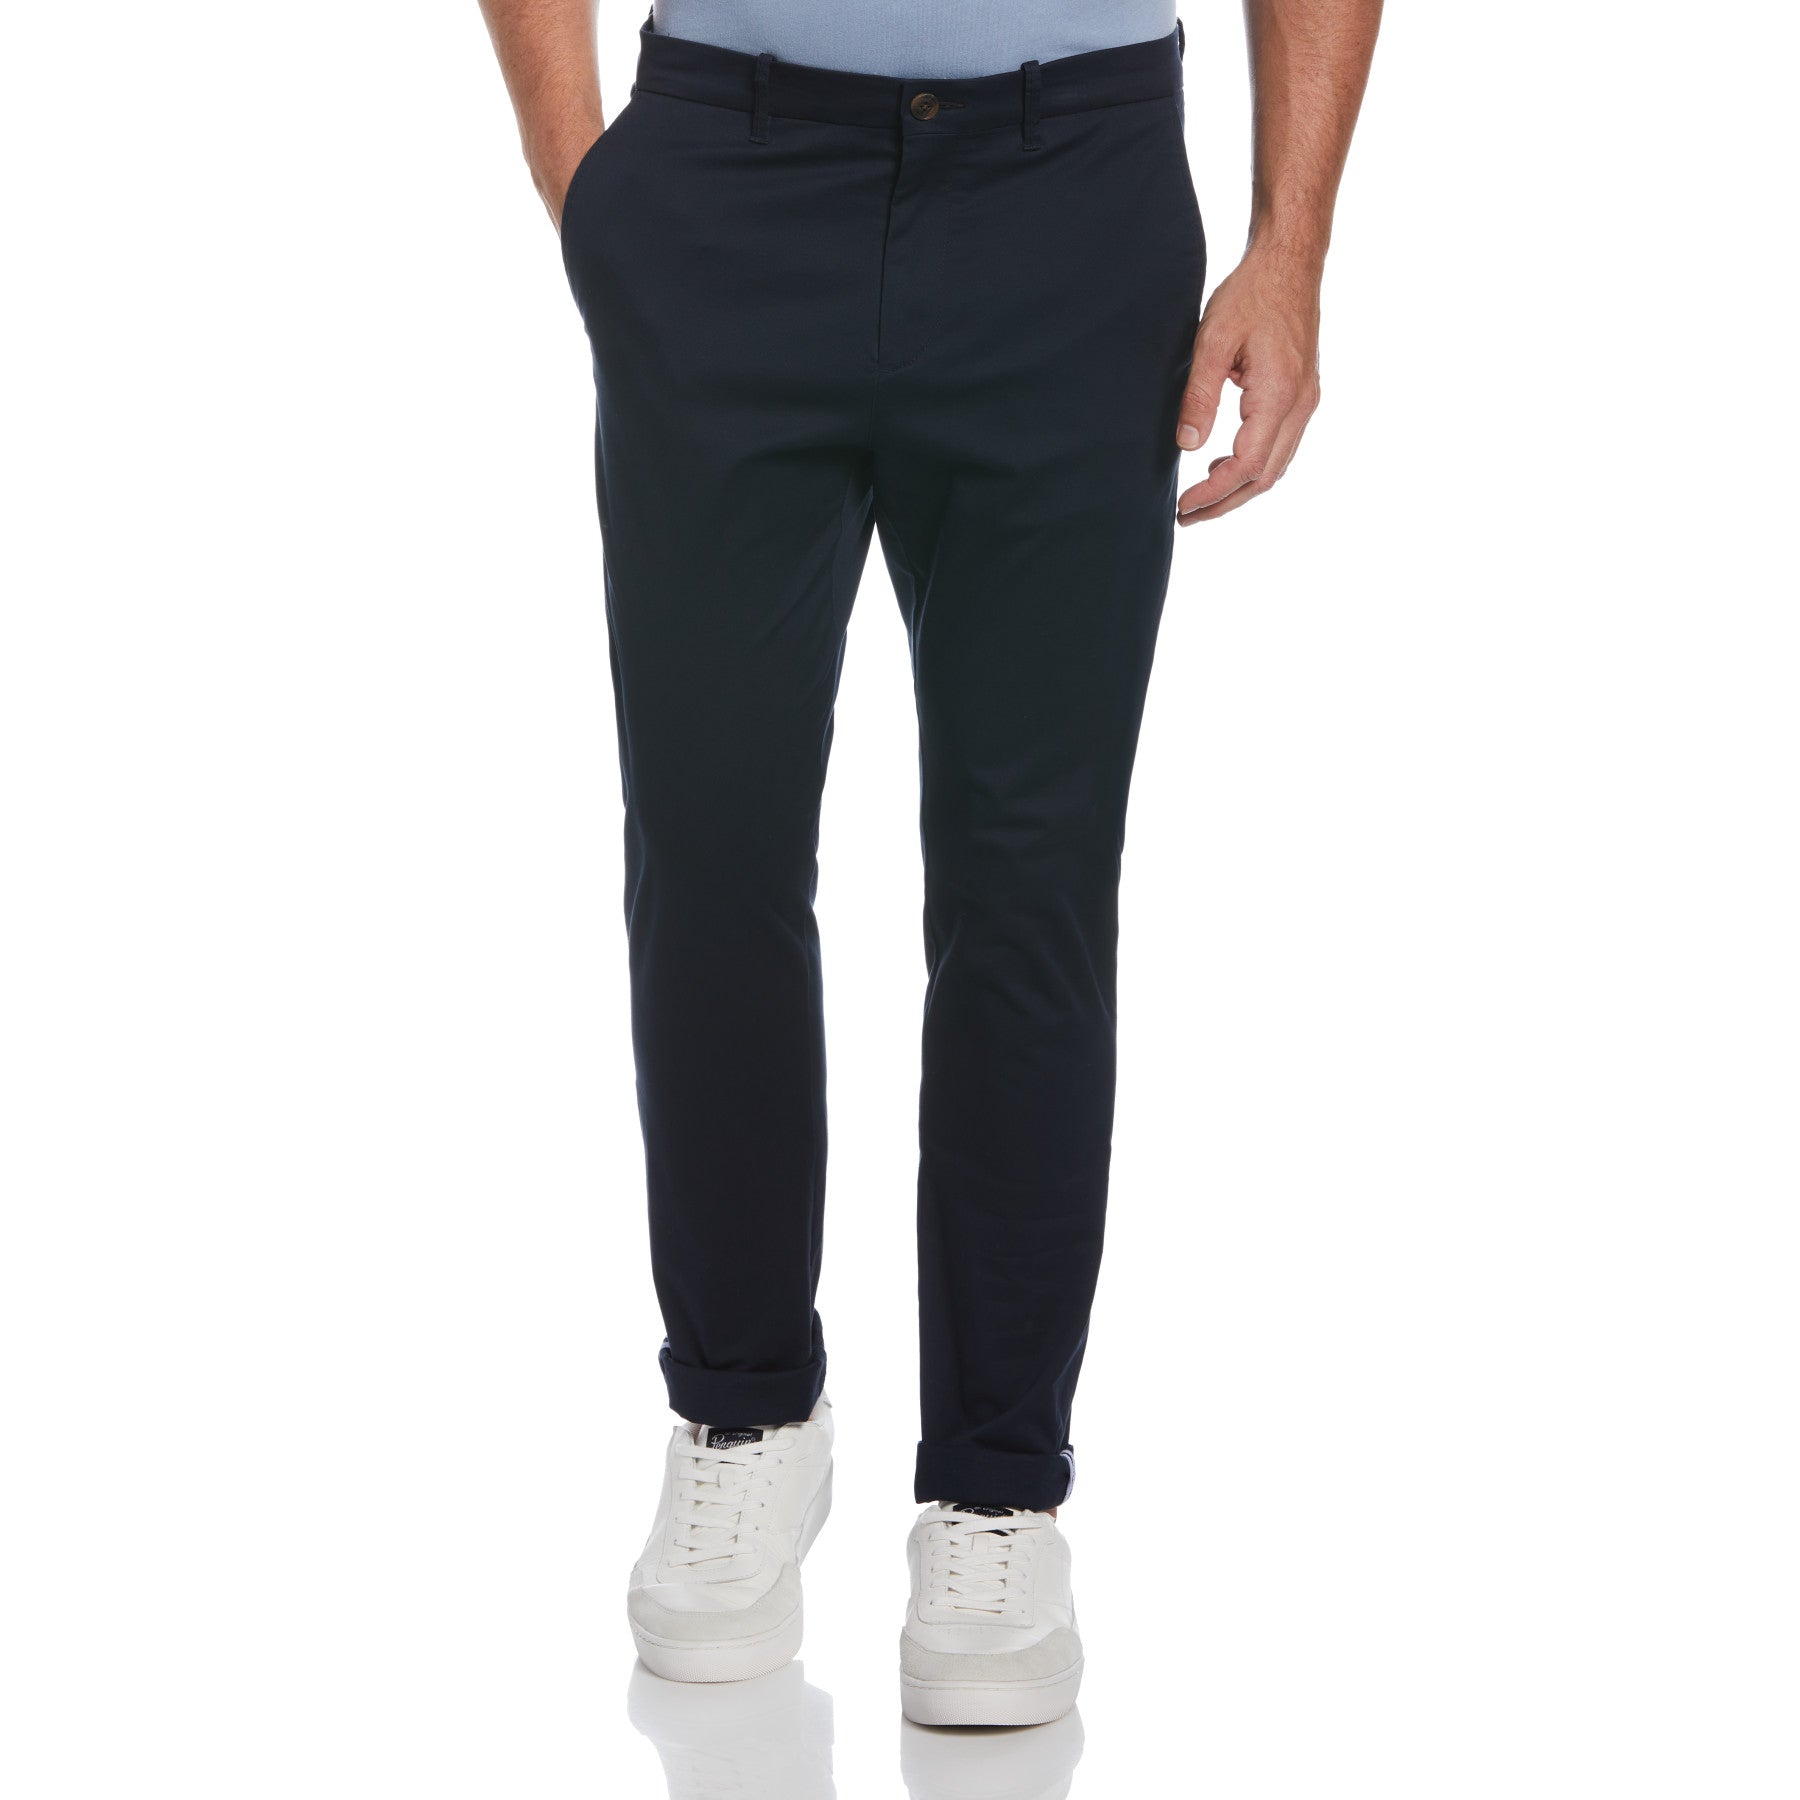 View Recycled Cotton Stretch Twill Chino Pant In Dark Sapphire information